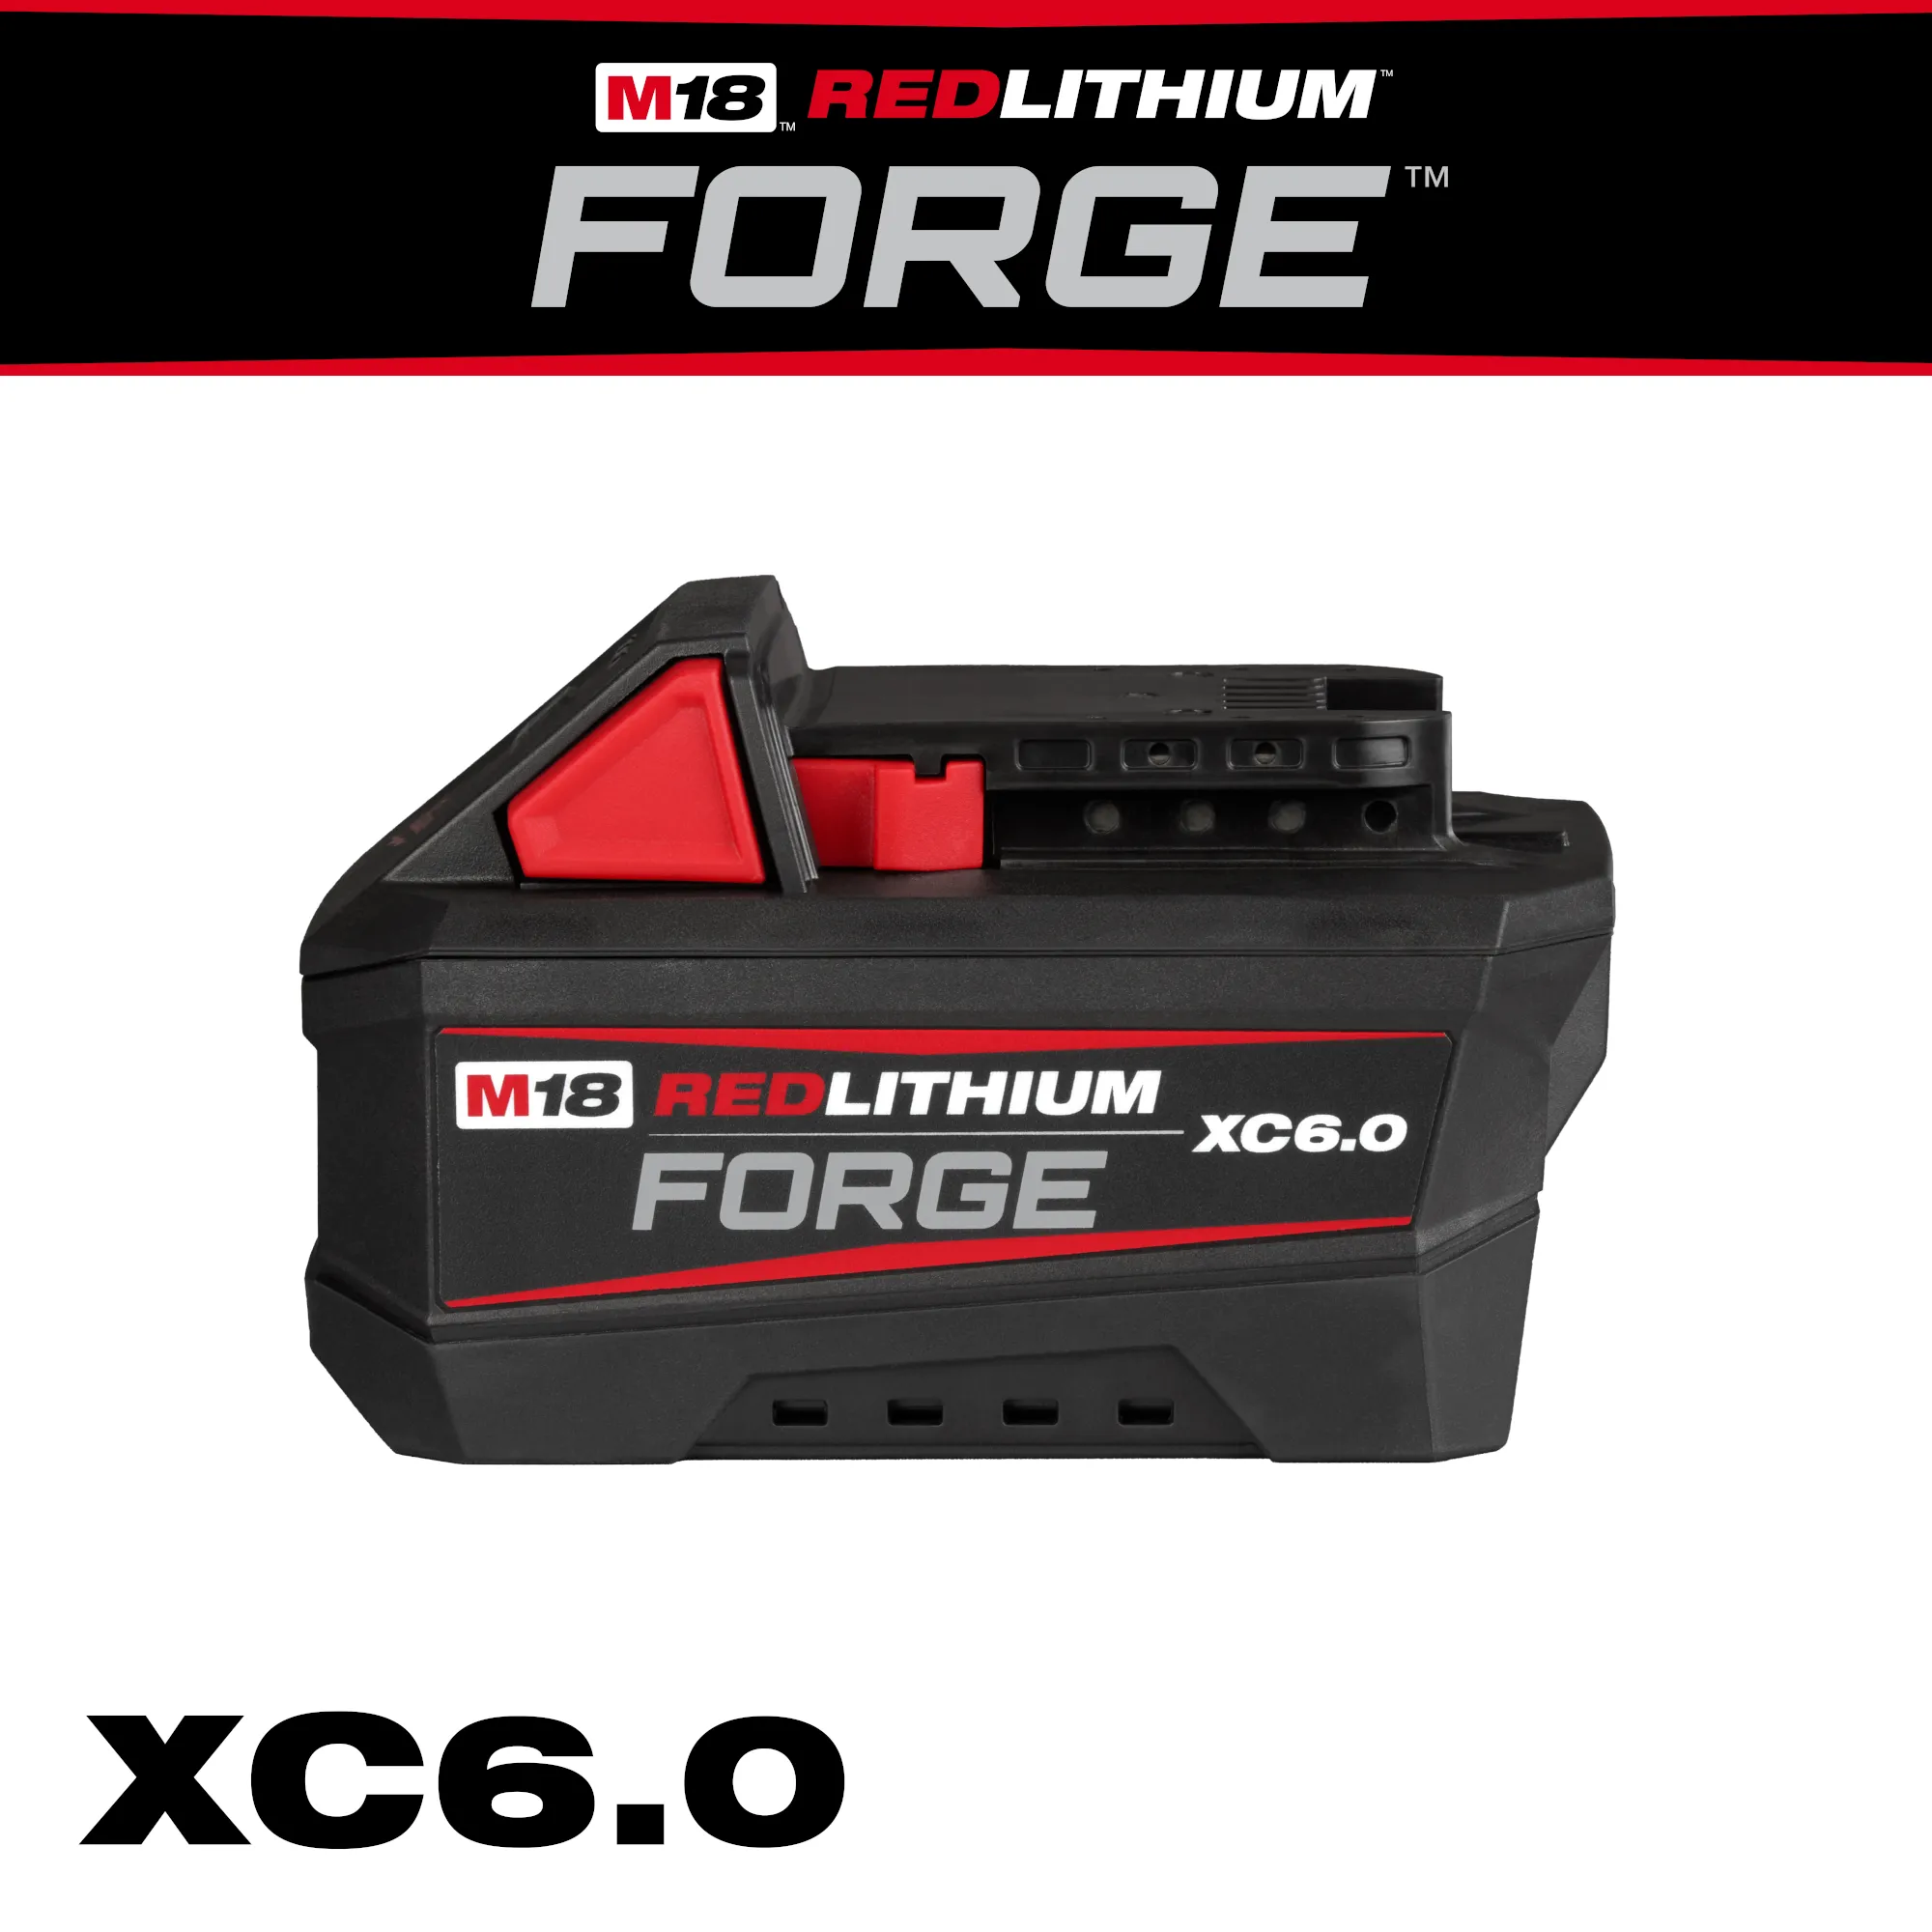 48 11 1861 M18™ REDLITHIUM™ FORGE™ XC6.0 BATTERY PACK